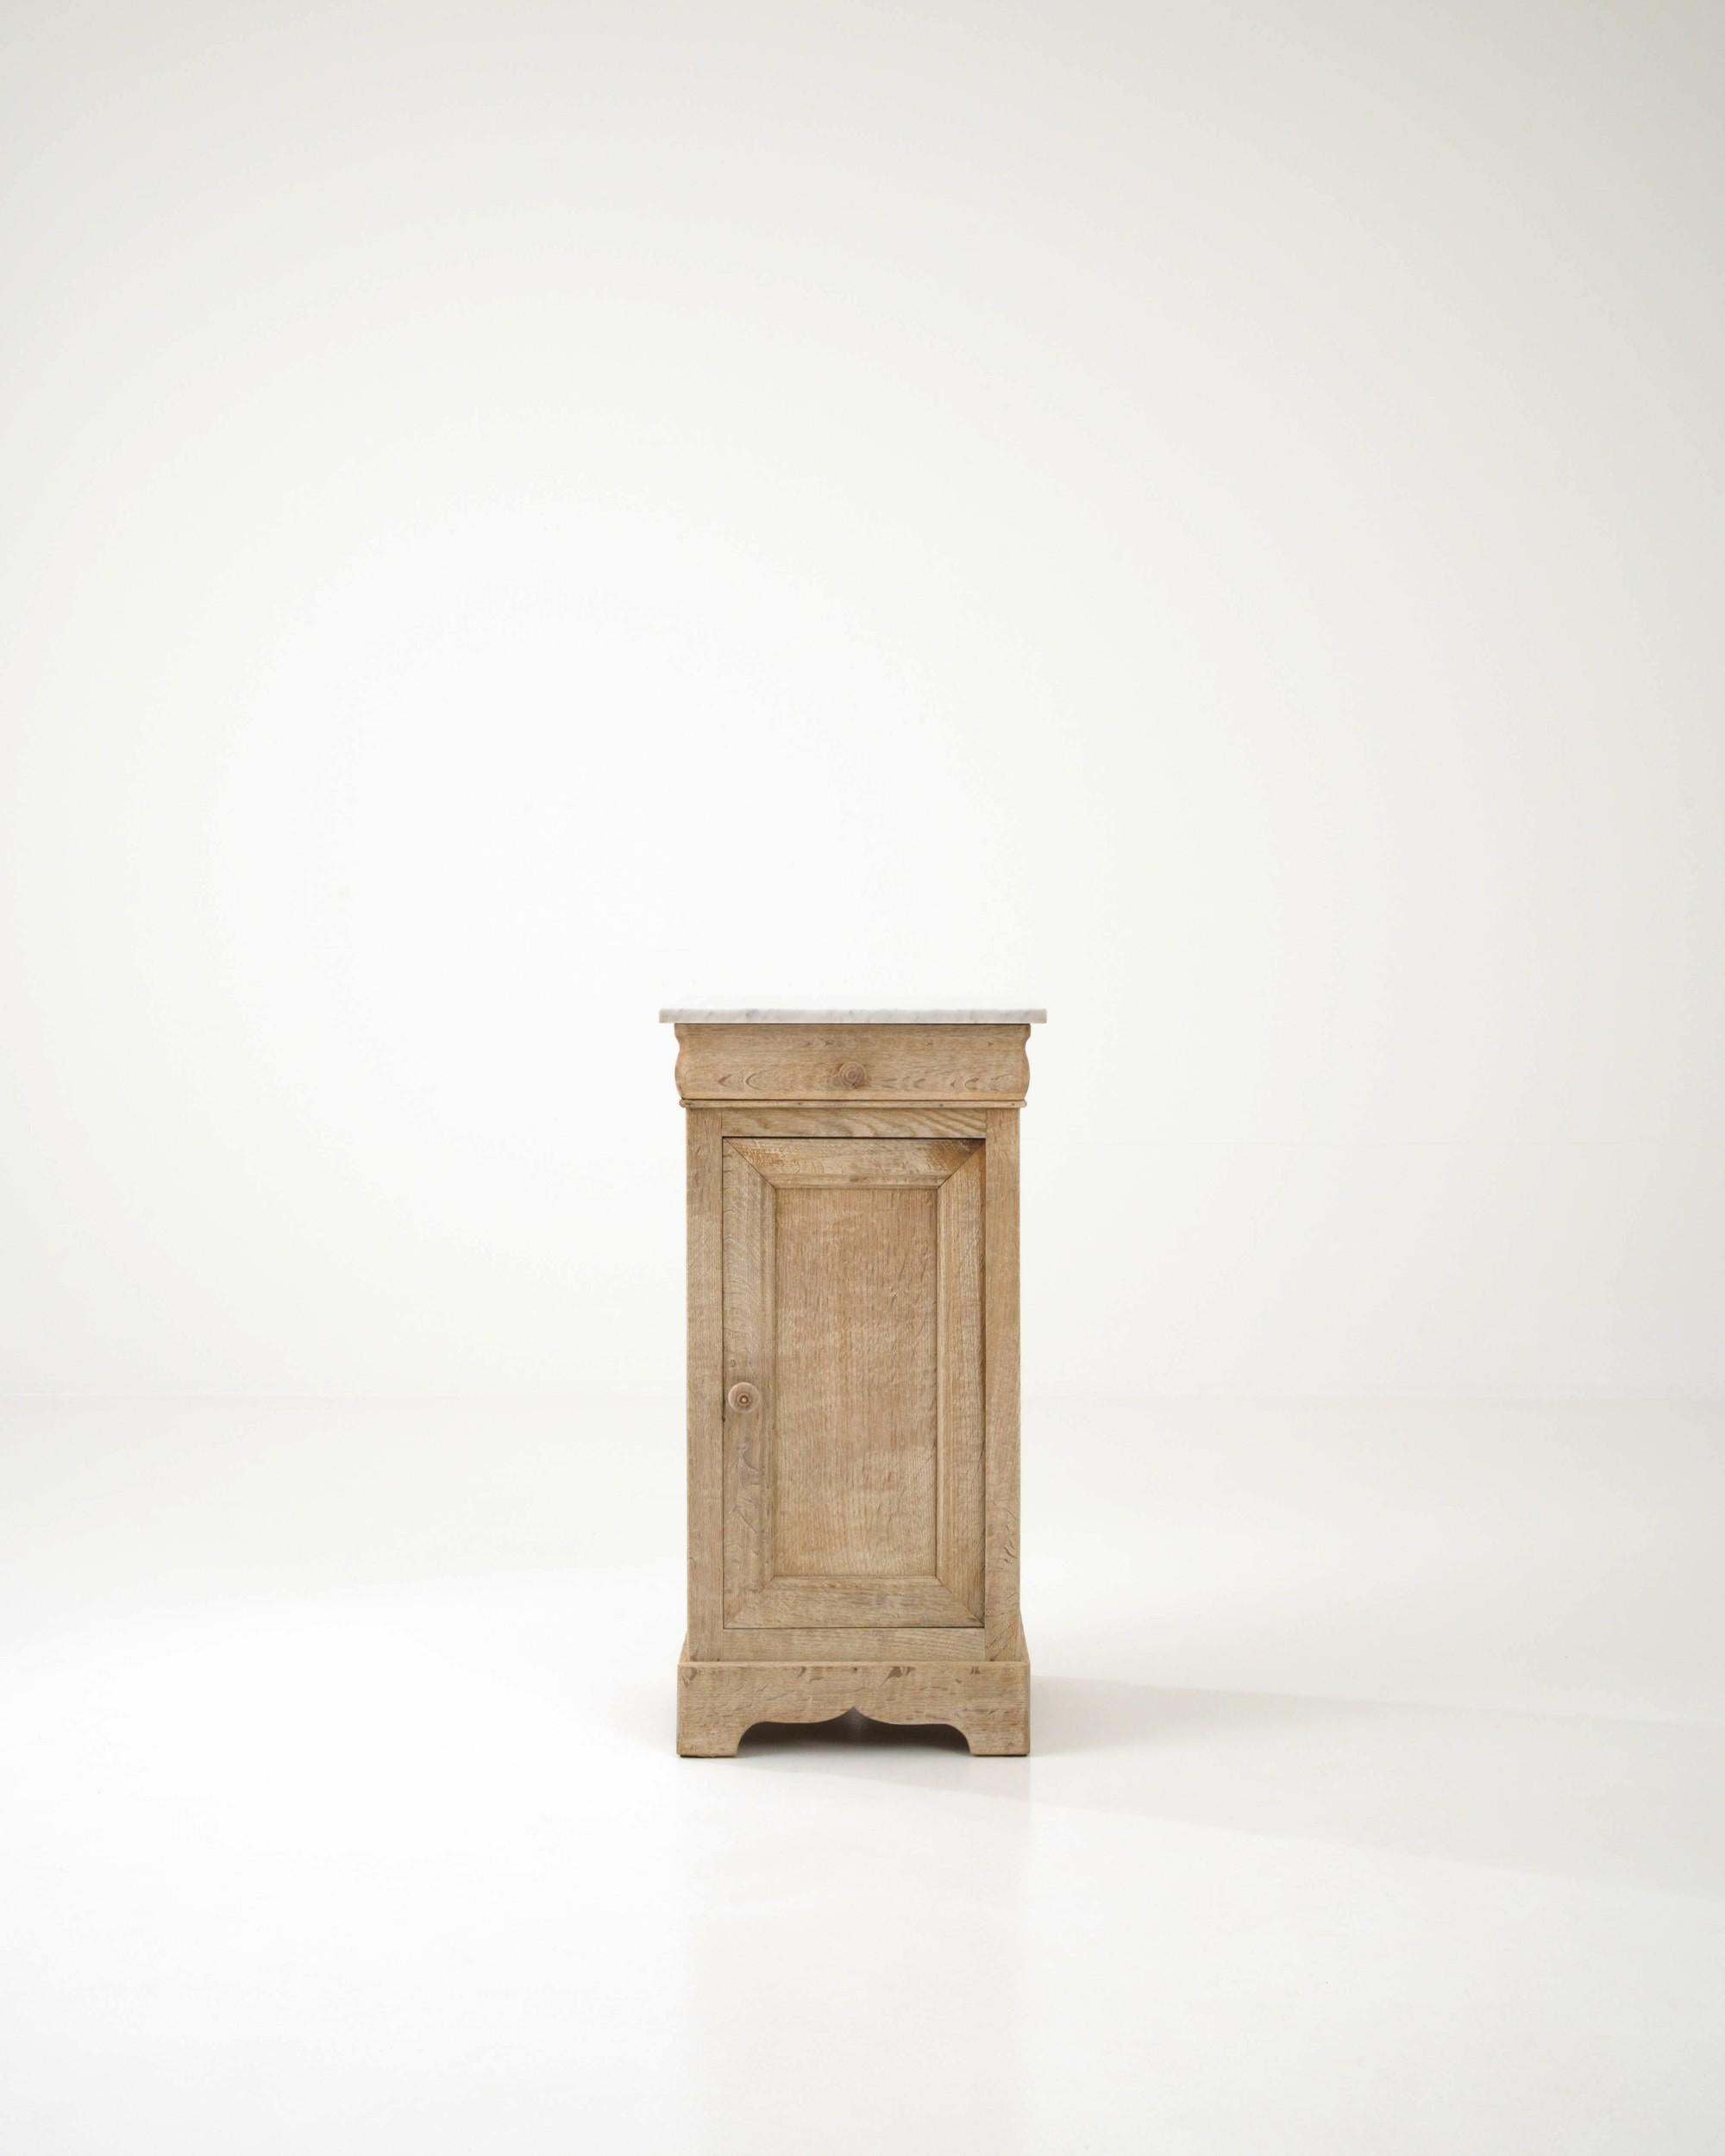 An oak night stand created in France circa 1900. Traditionally crafted, this subtly styled bedside table is adorned with a marble top, projecting a sense of calm and refined elegance. Cloudy gray veins drift through the ivory colored marble top